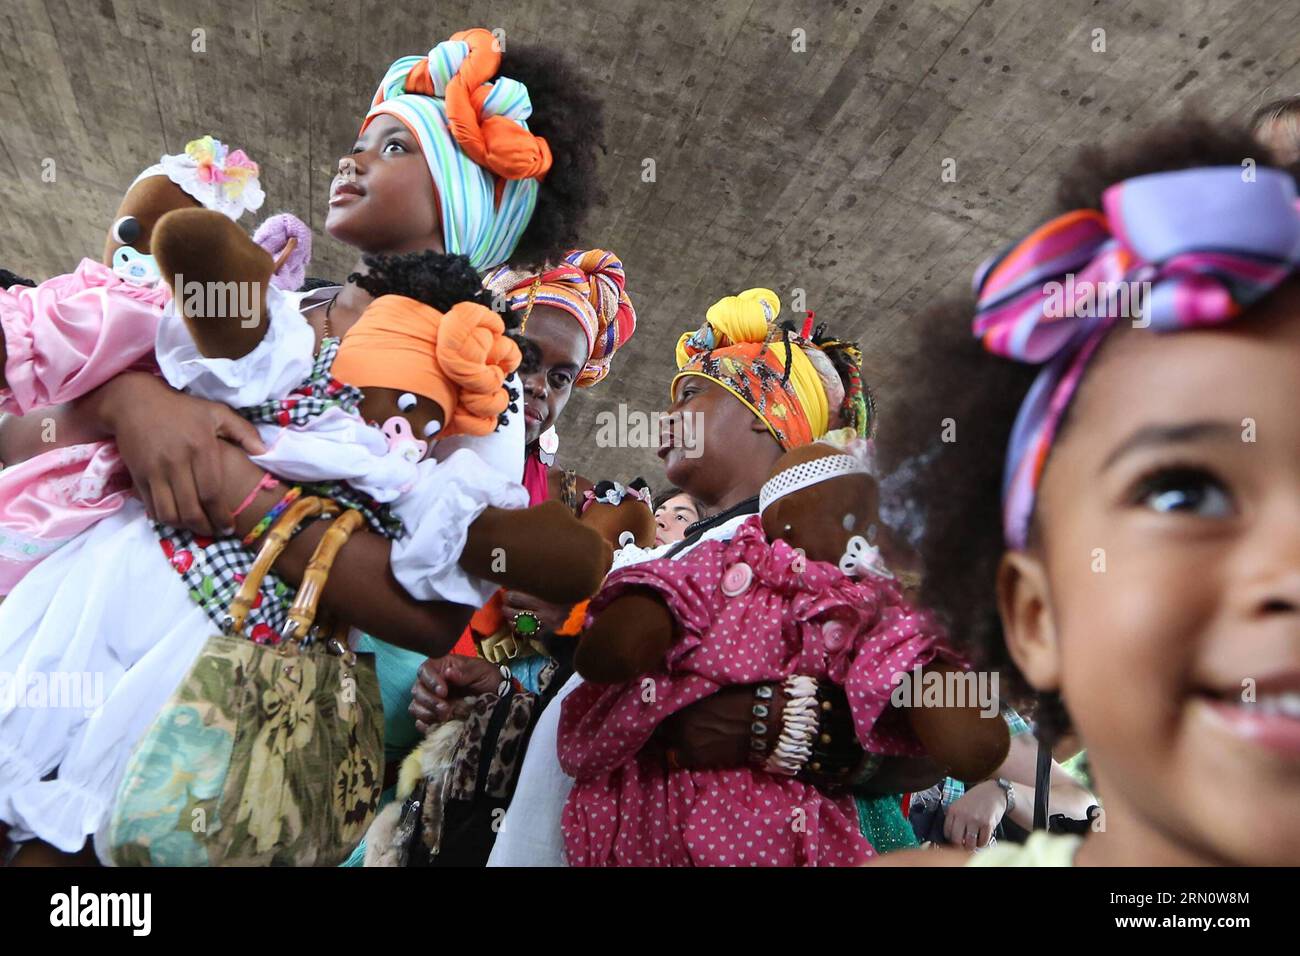 (141120) -- SAO PAULO, Nov. 20, 2014 -- People take part in the celebration of Black Consciousness Day in Sao Paulo, Brazil, on Nov. 20, 2014. The Day of Black Consciousness was first celebrated in 1978 to commemorate Zumbi dos Palmares, a black Brazilian who led a group of runaway slaves in Brazil, known as the Quilombo dos Palmares, to fight the then Portuguese colonizers in the 17th century and was killed in an ambush on Nov. 20, 1695. Rahel Patrasso) (jg) BRAZIL-SAO PAULO-BLACK CONSCIOUSNESS DAY e RahelxPatrasso PUBLICATIONxNOTxINxCHN   Sao Paulo Nov 20 2014 Celebrities Take Part in The Ce Stock Photo